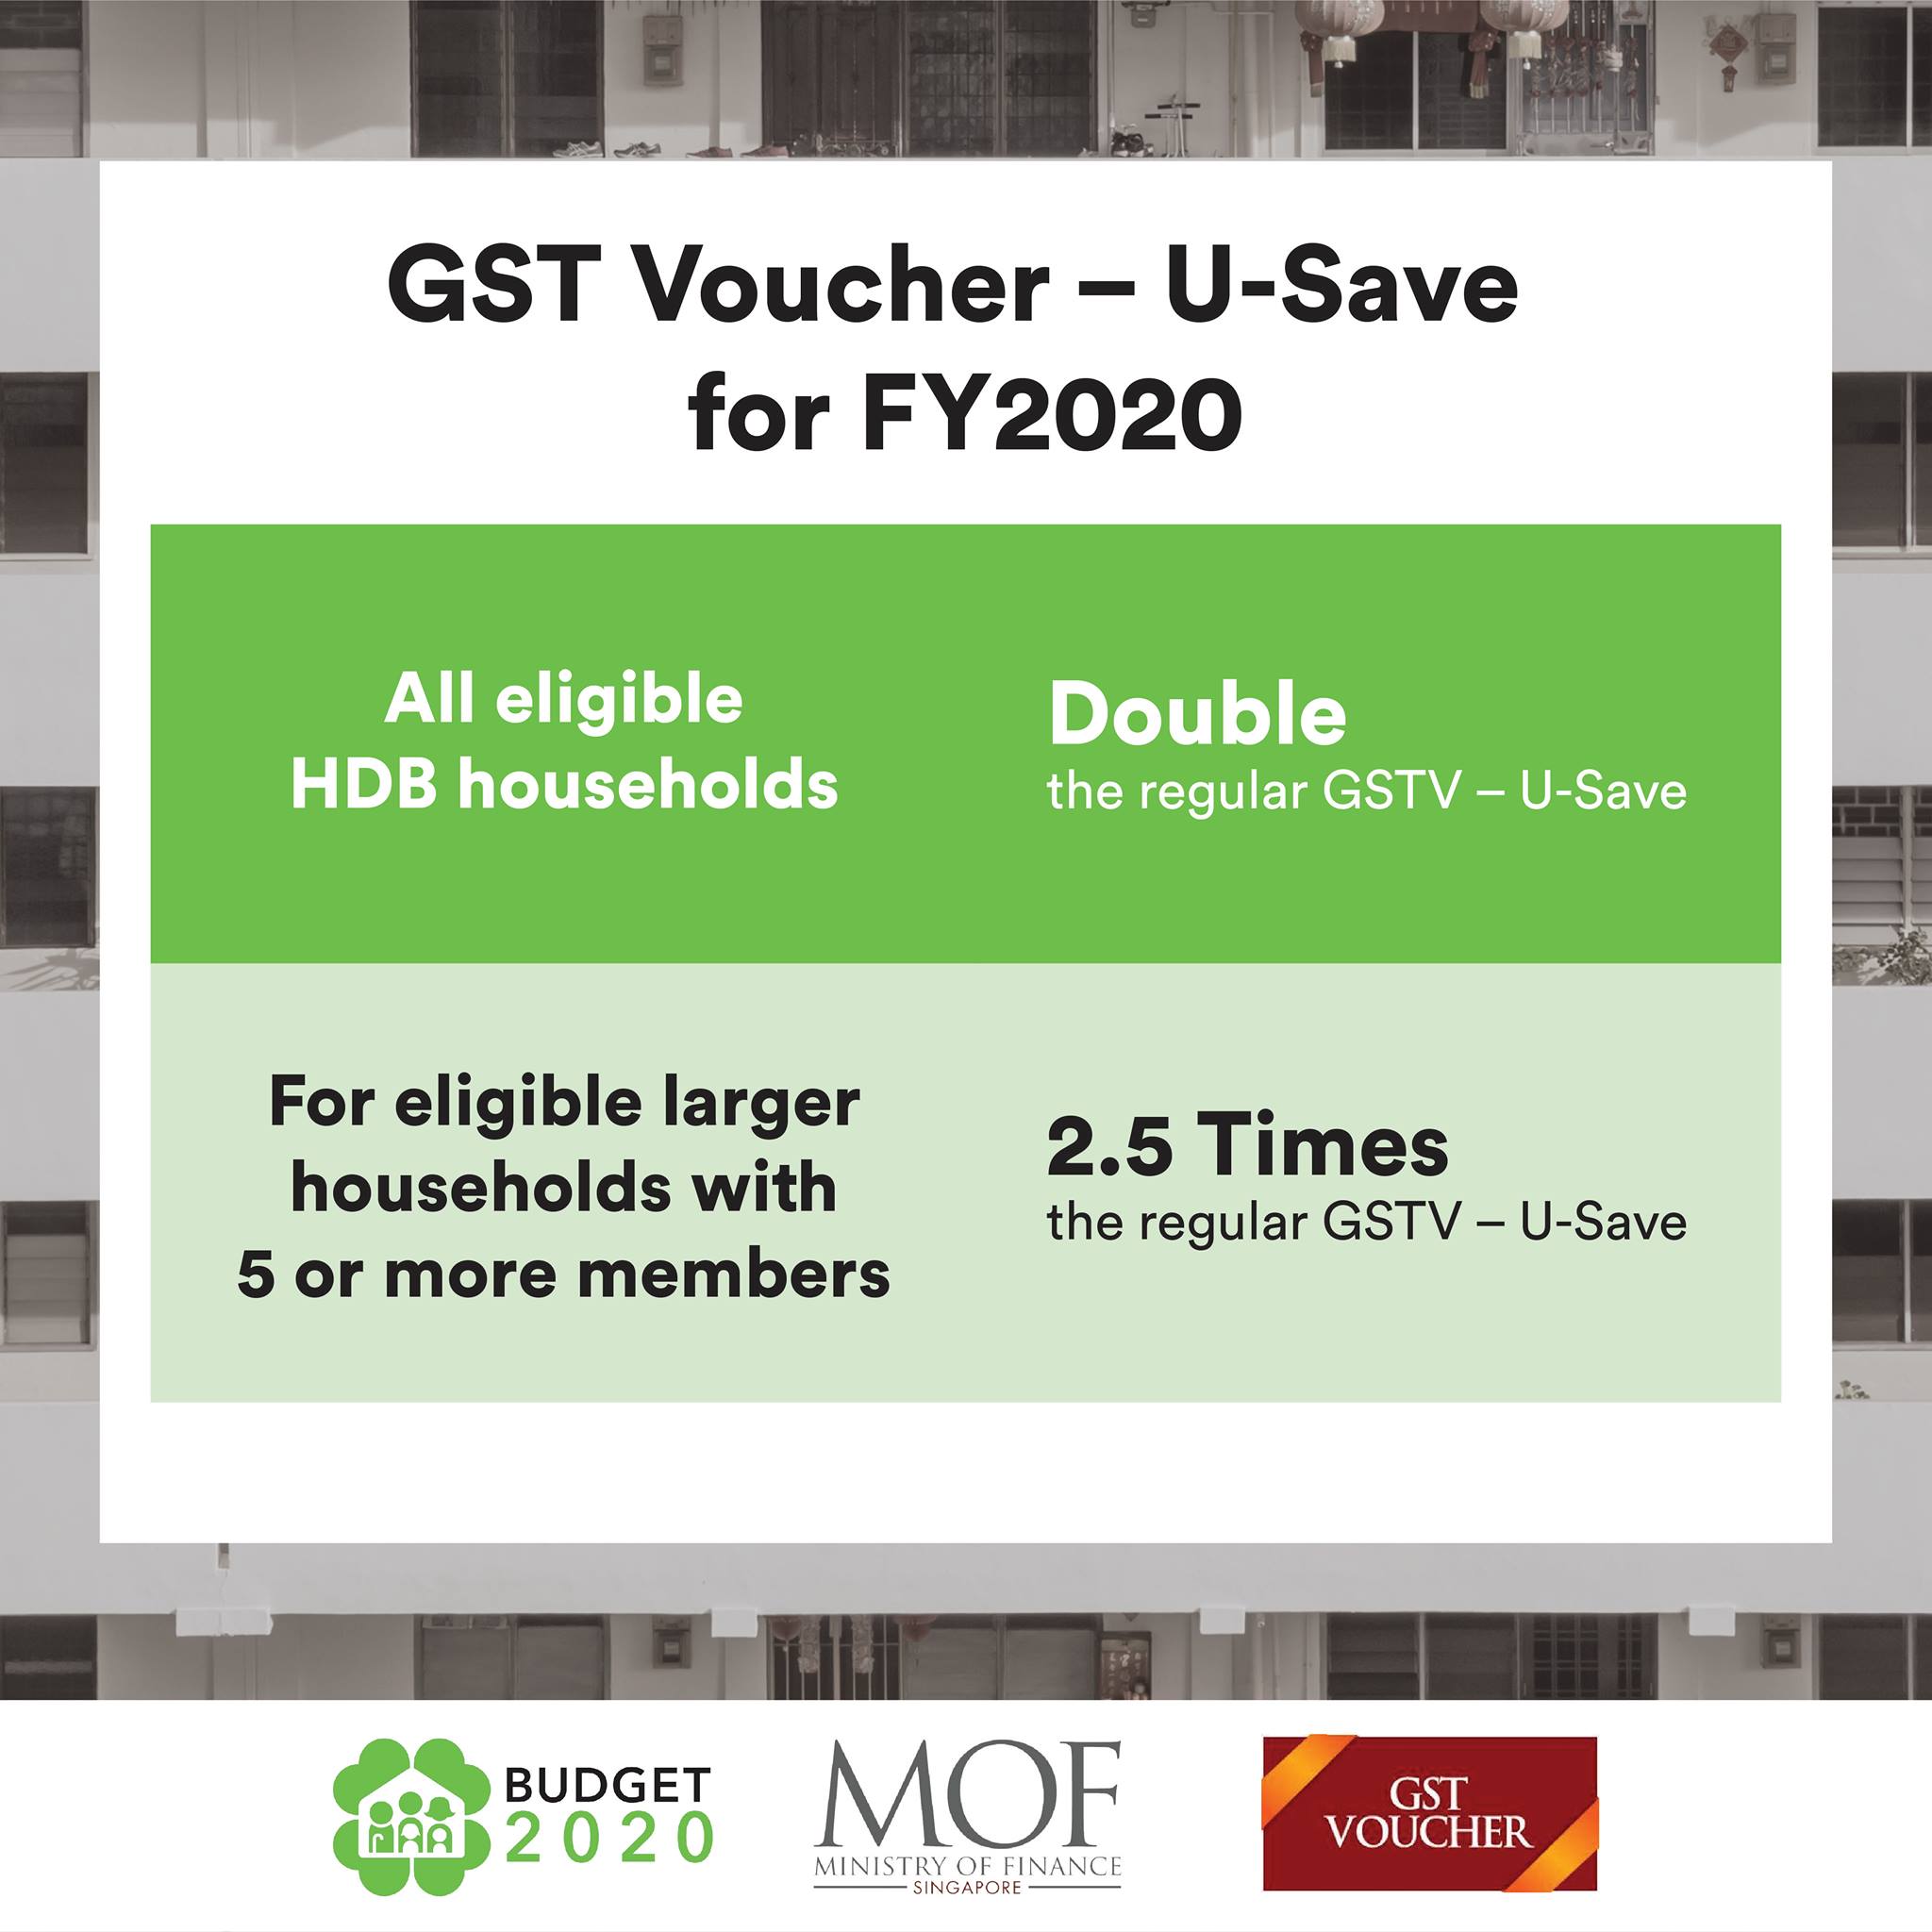 940 000 Households In S Pore Will Receive Double Their Regular Gst Voucher U Save Rebates For Fy 2020 Mothership Sg News From Singapore Asia And Around The World